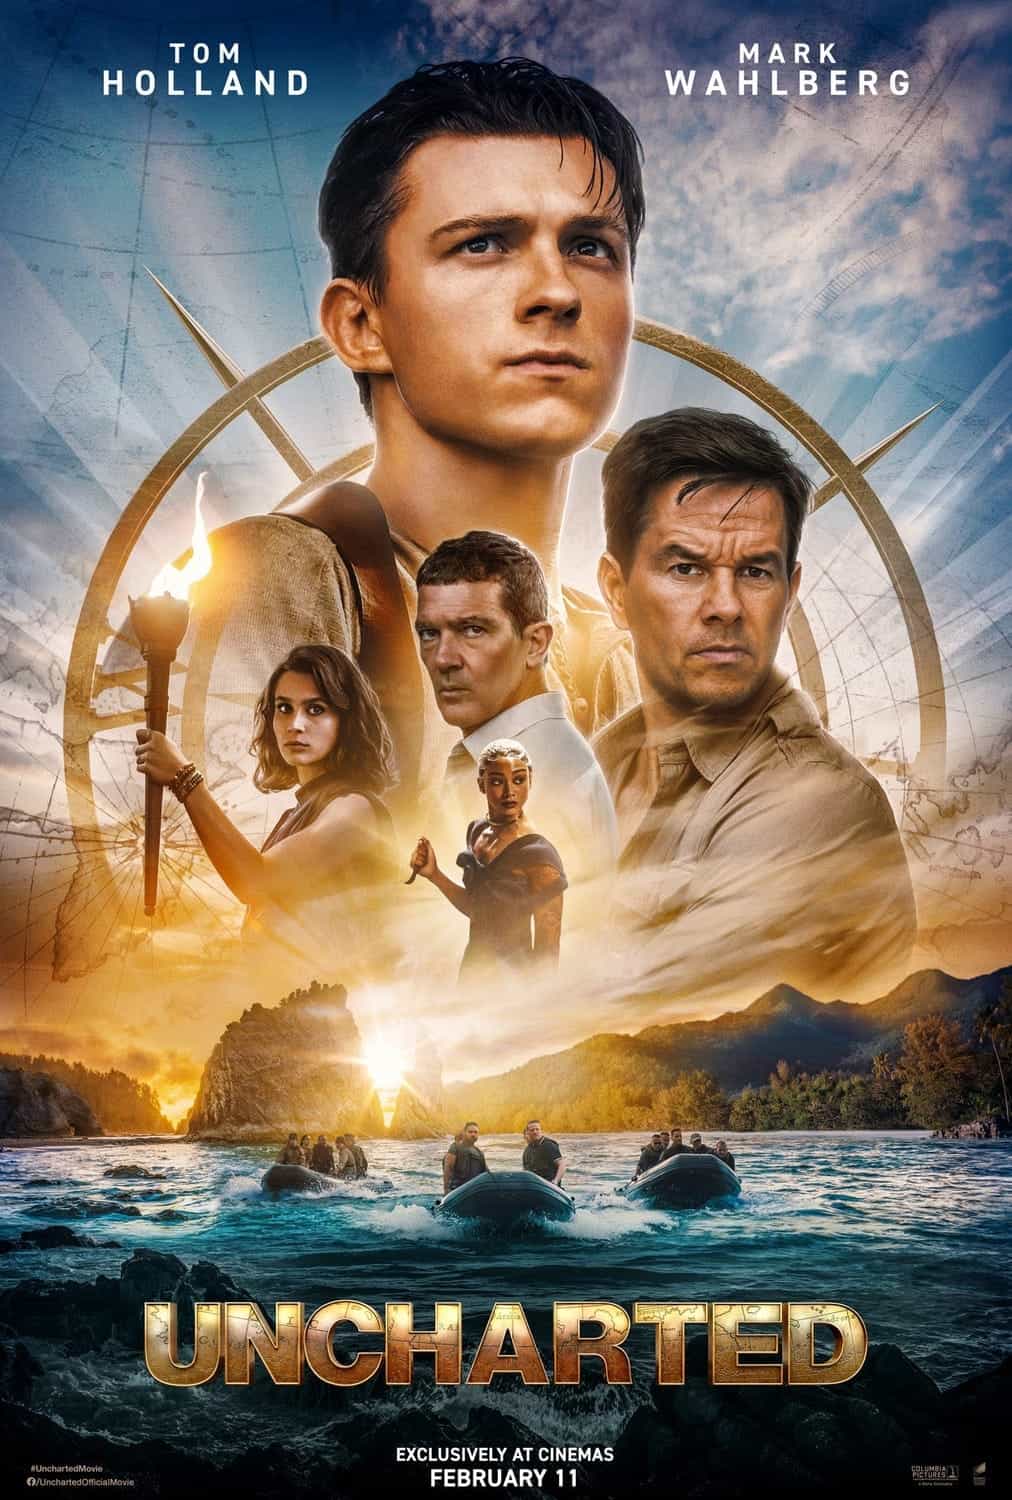 Global Box Office Figures 18th - 20th February 2022: Uncharted tops the global box office on its second weekend of release